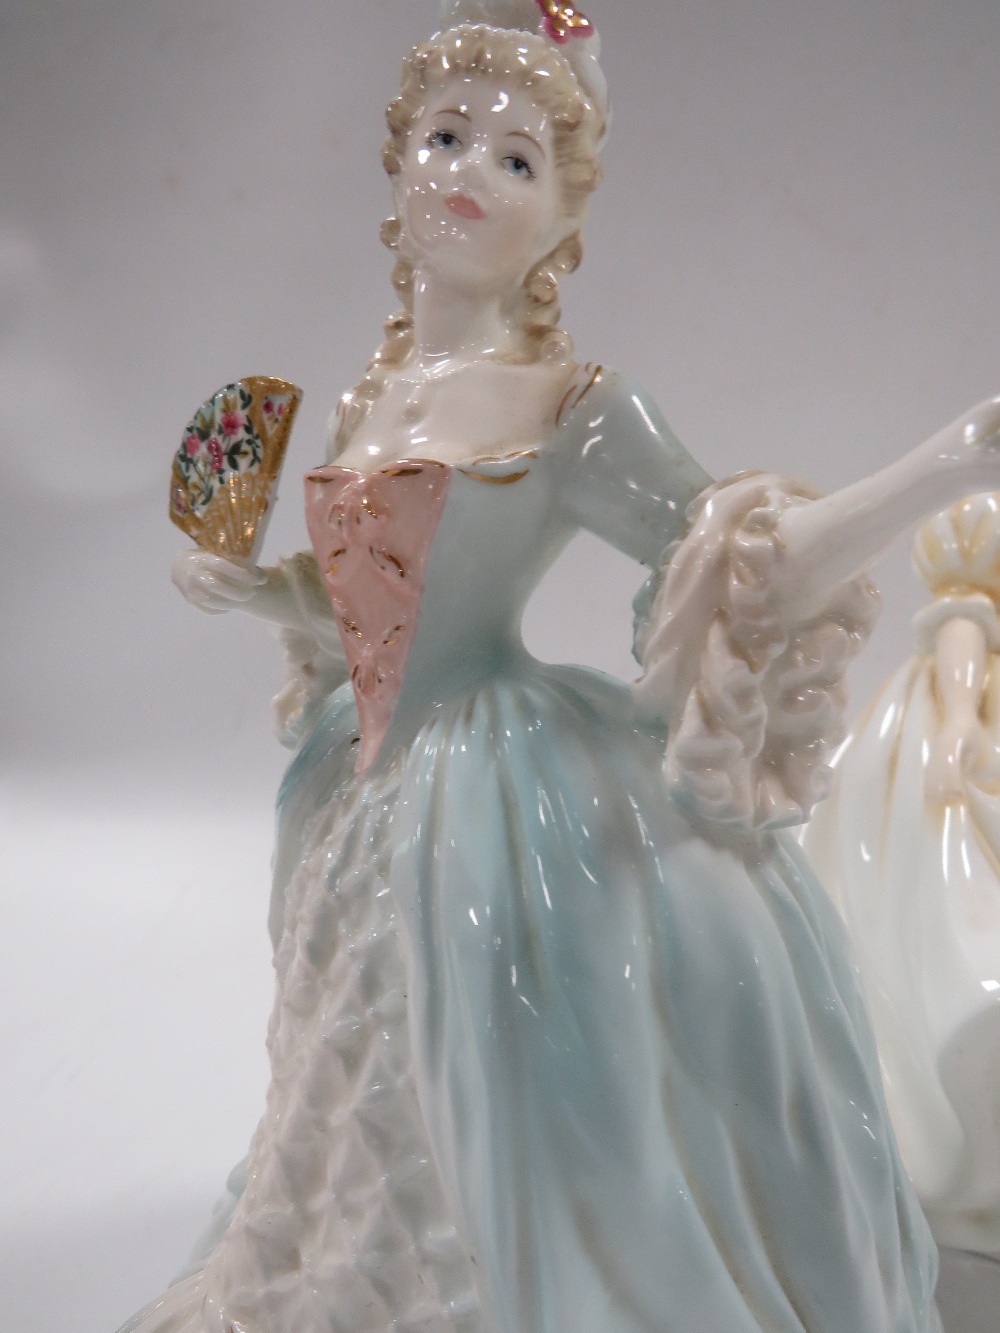 A ROYAL DOULTON FIGURINE "SHALL I COMPARE THEE" TOGETHER WITH "NATALIE" AND TWO COALPORT - Image 4 of 5